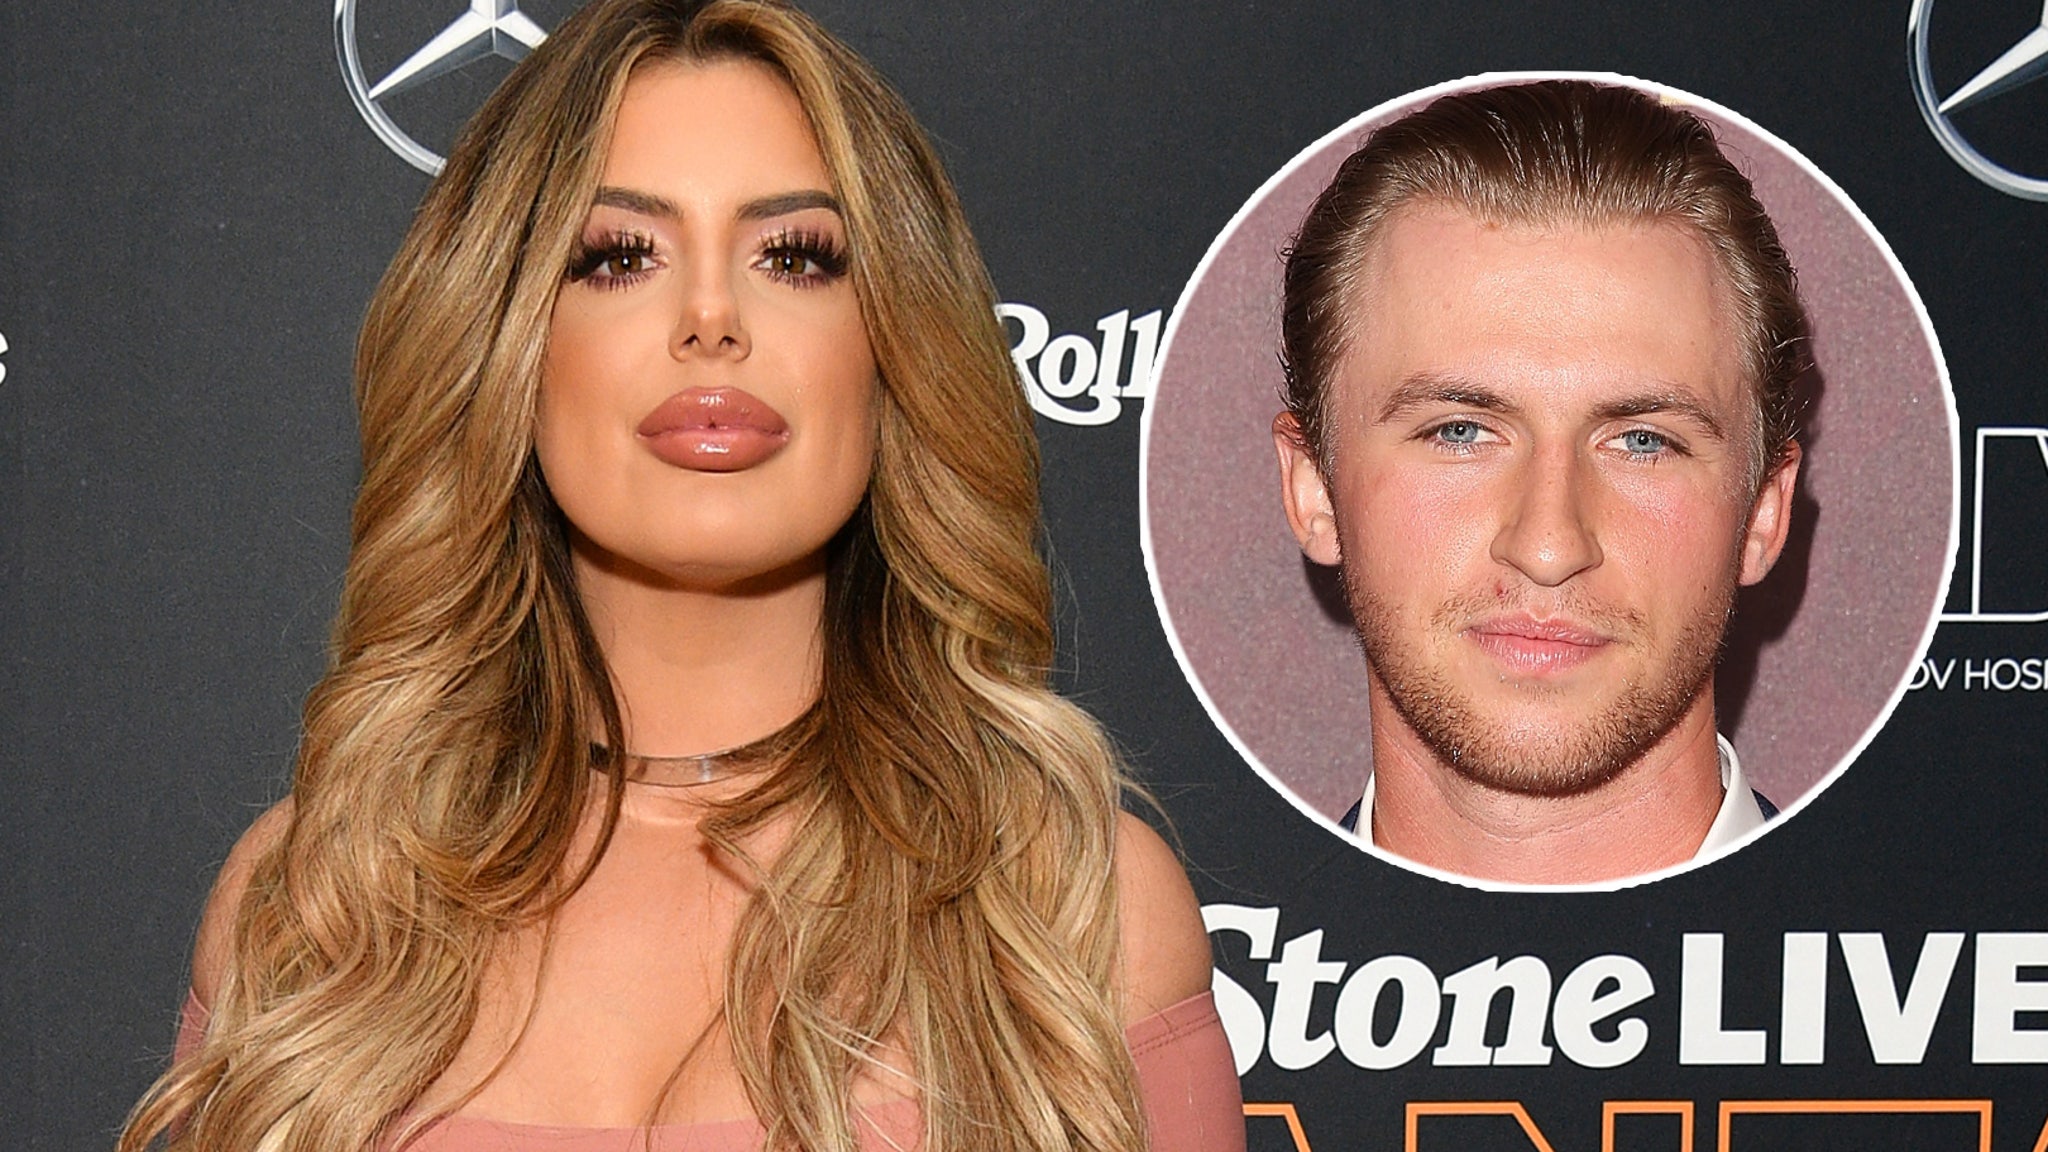 Don't Be Tardy' Star Brielle Biermann Wants to Move in With